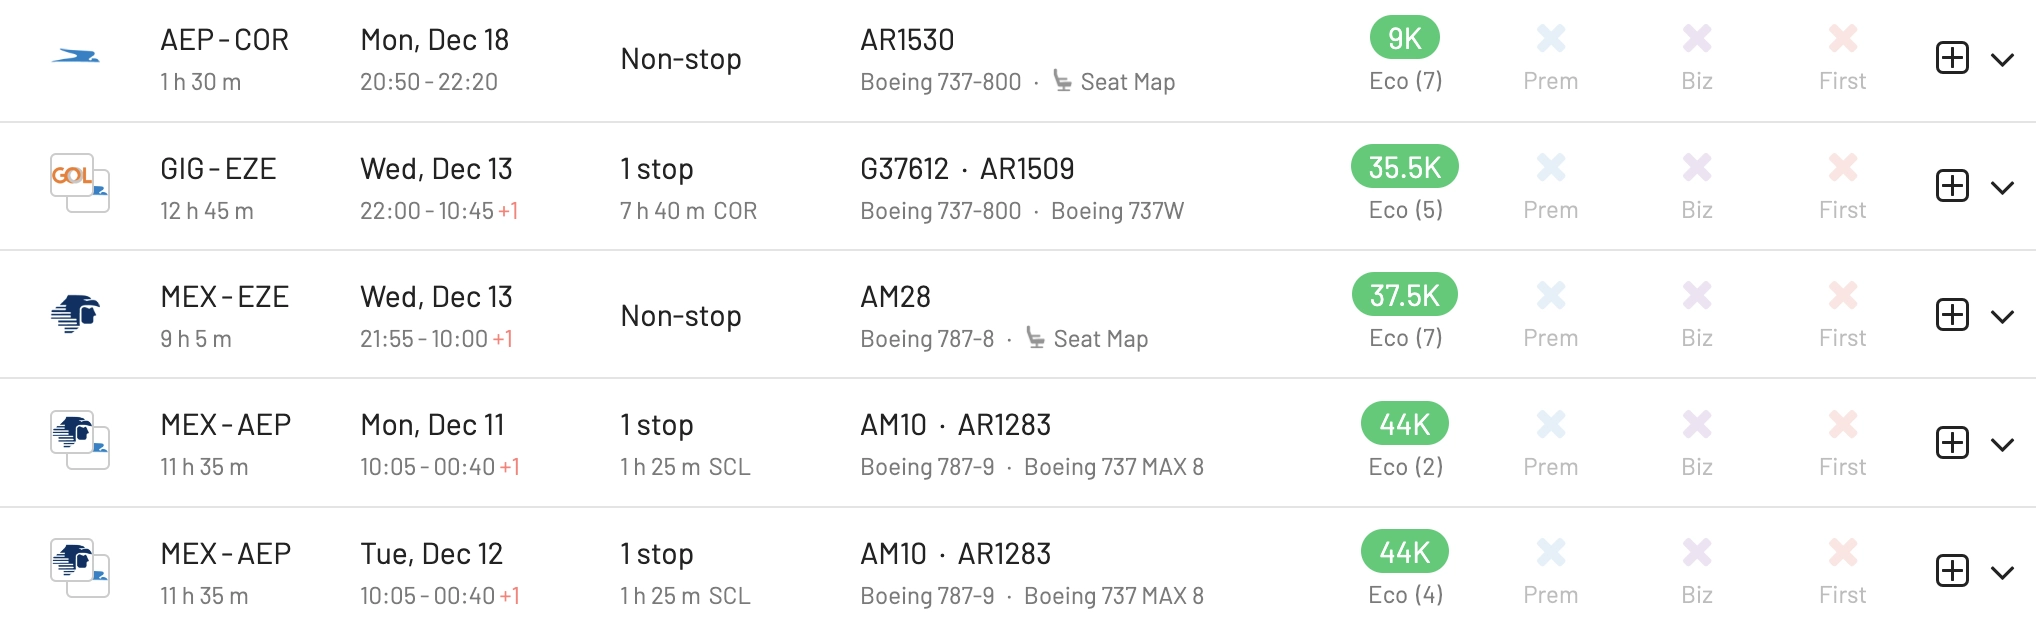 Search for Flying Blue availability on GOL and Aeroméxico using AwardFares.